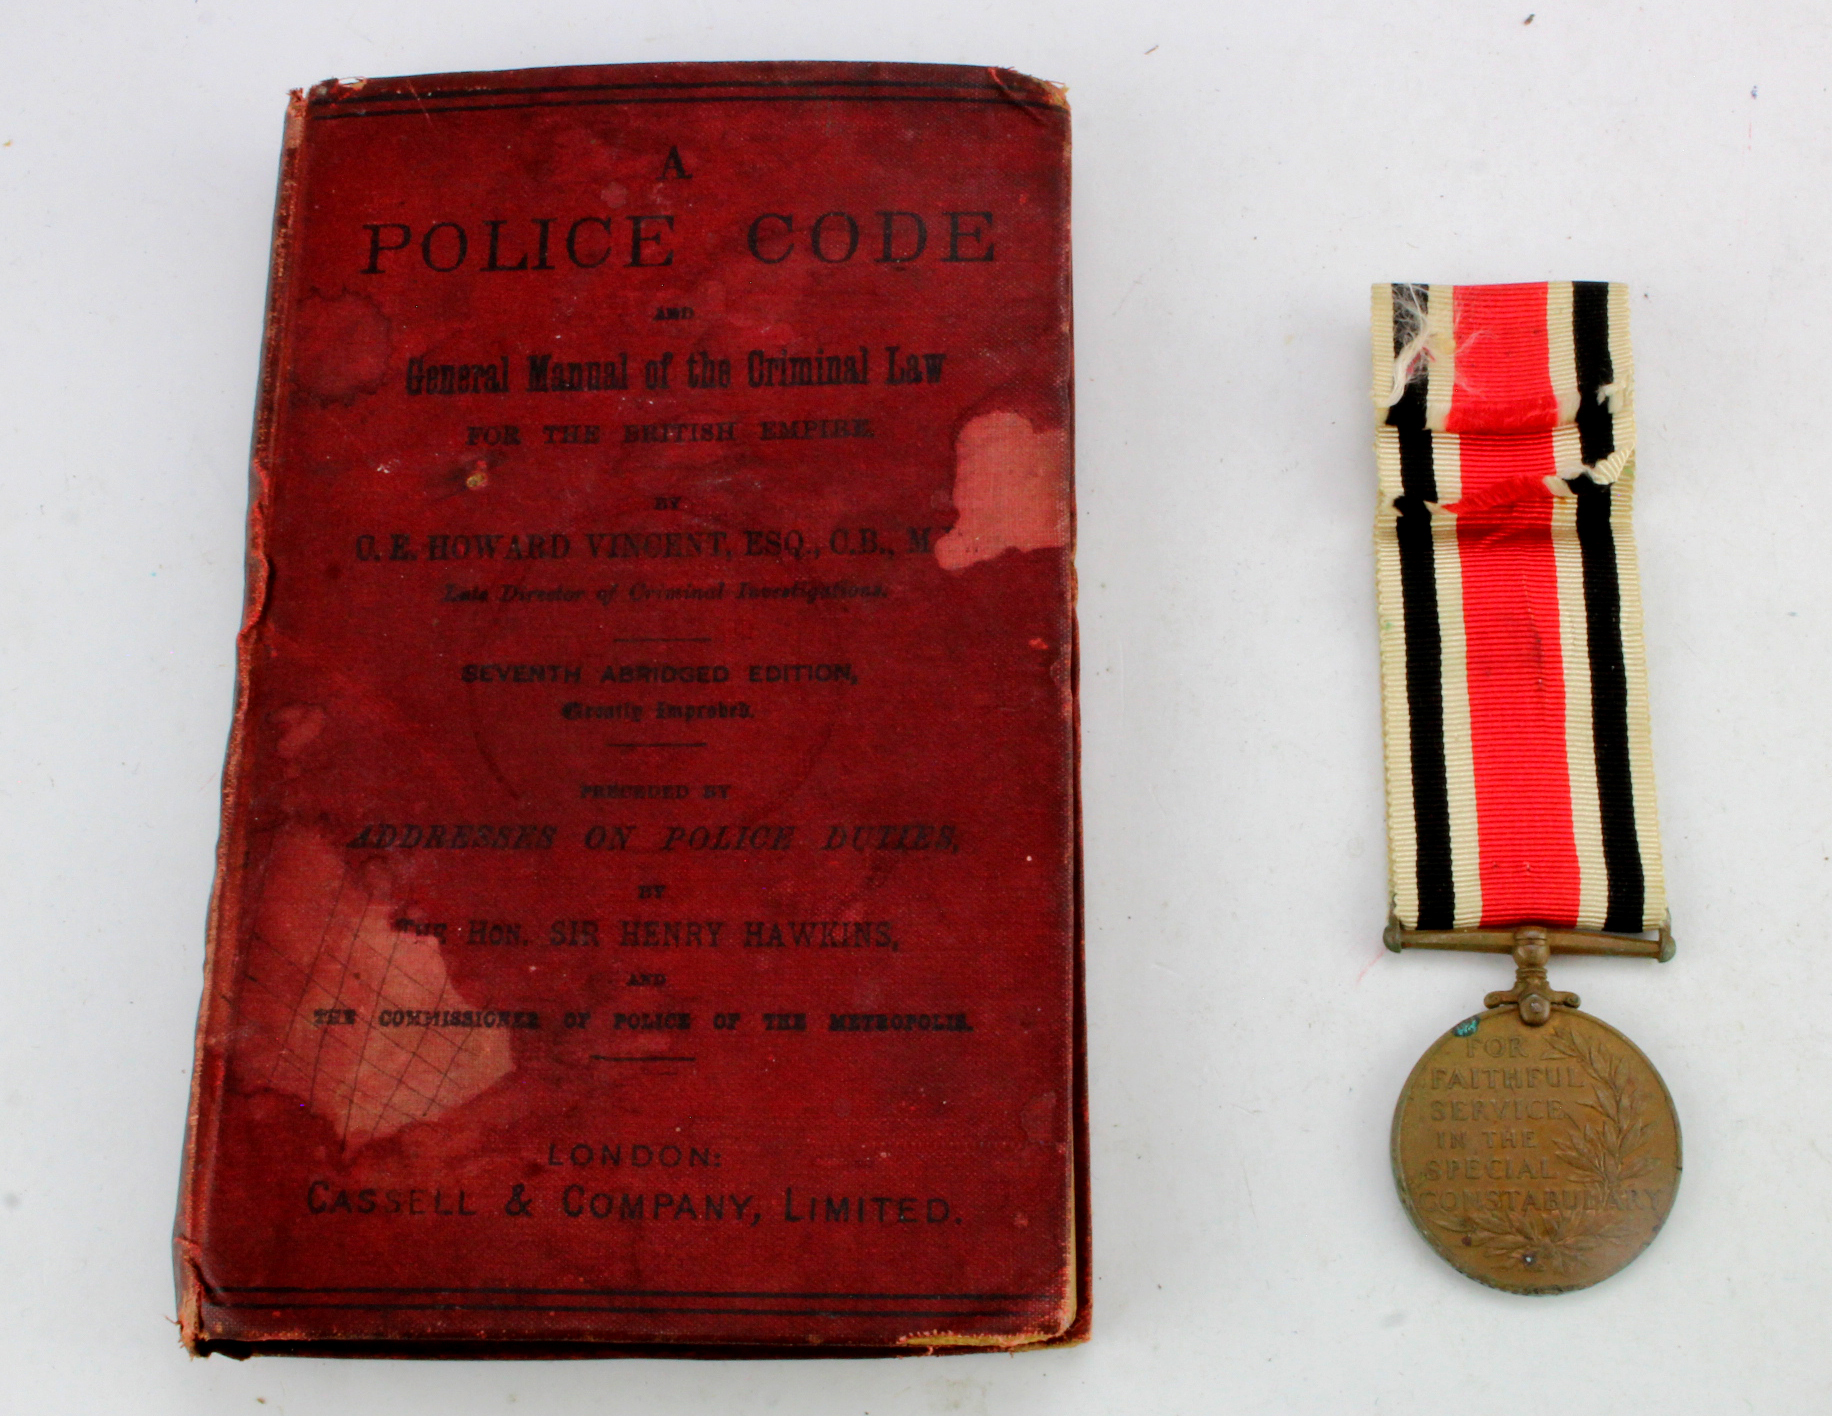 Special Constabulary GRV medal named to Bernard G Preston complete with his police code booklet